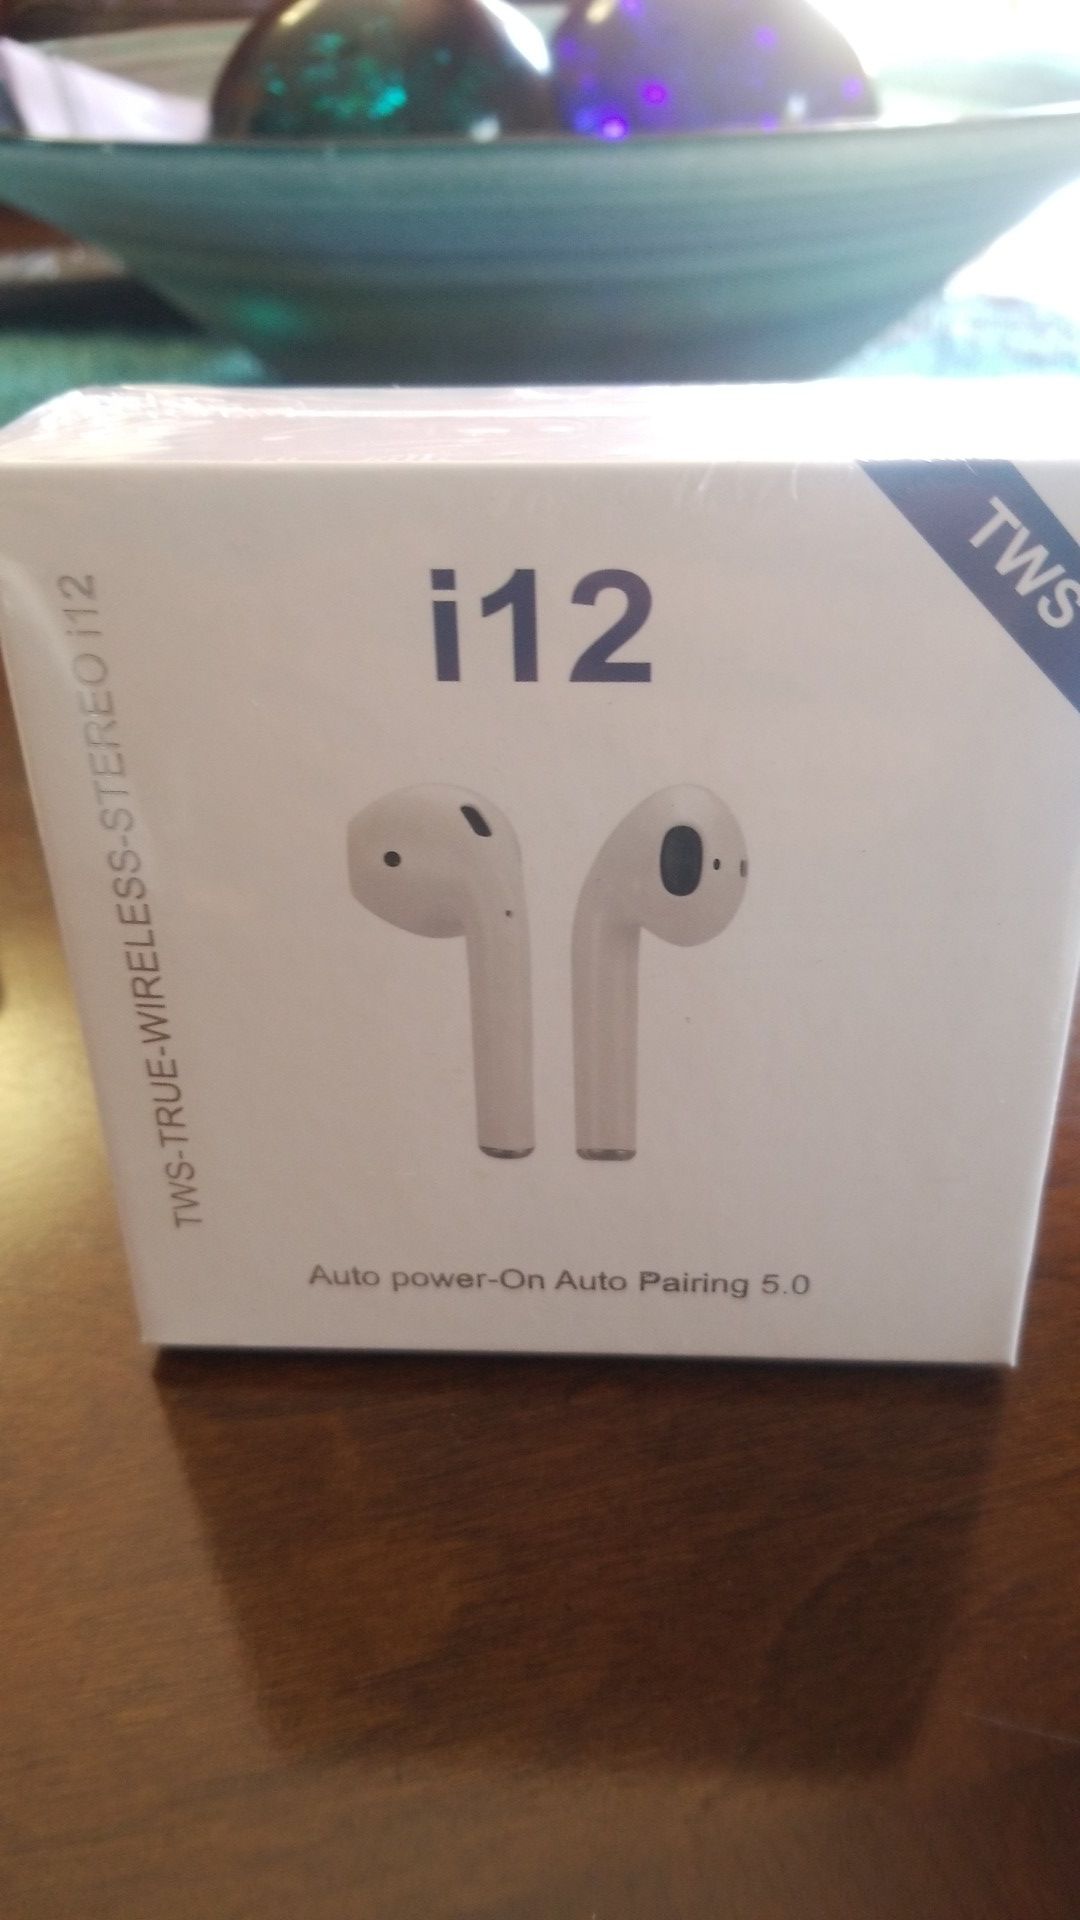 Airpods ,bluetooth airpods style earbuds smart touch control headset headphone